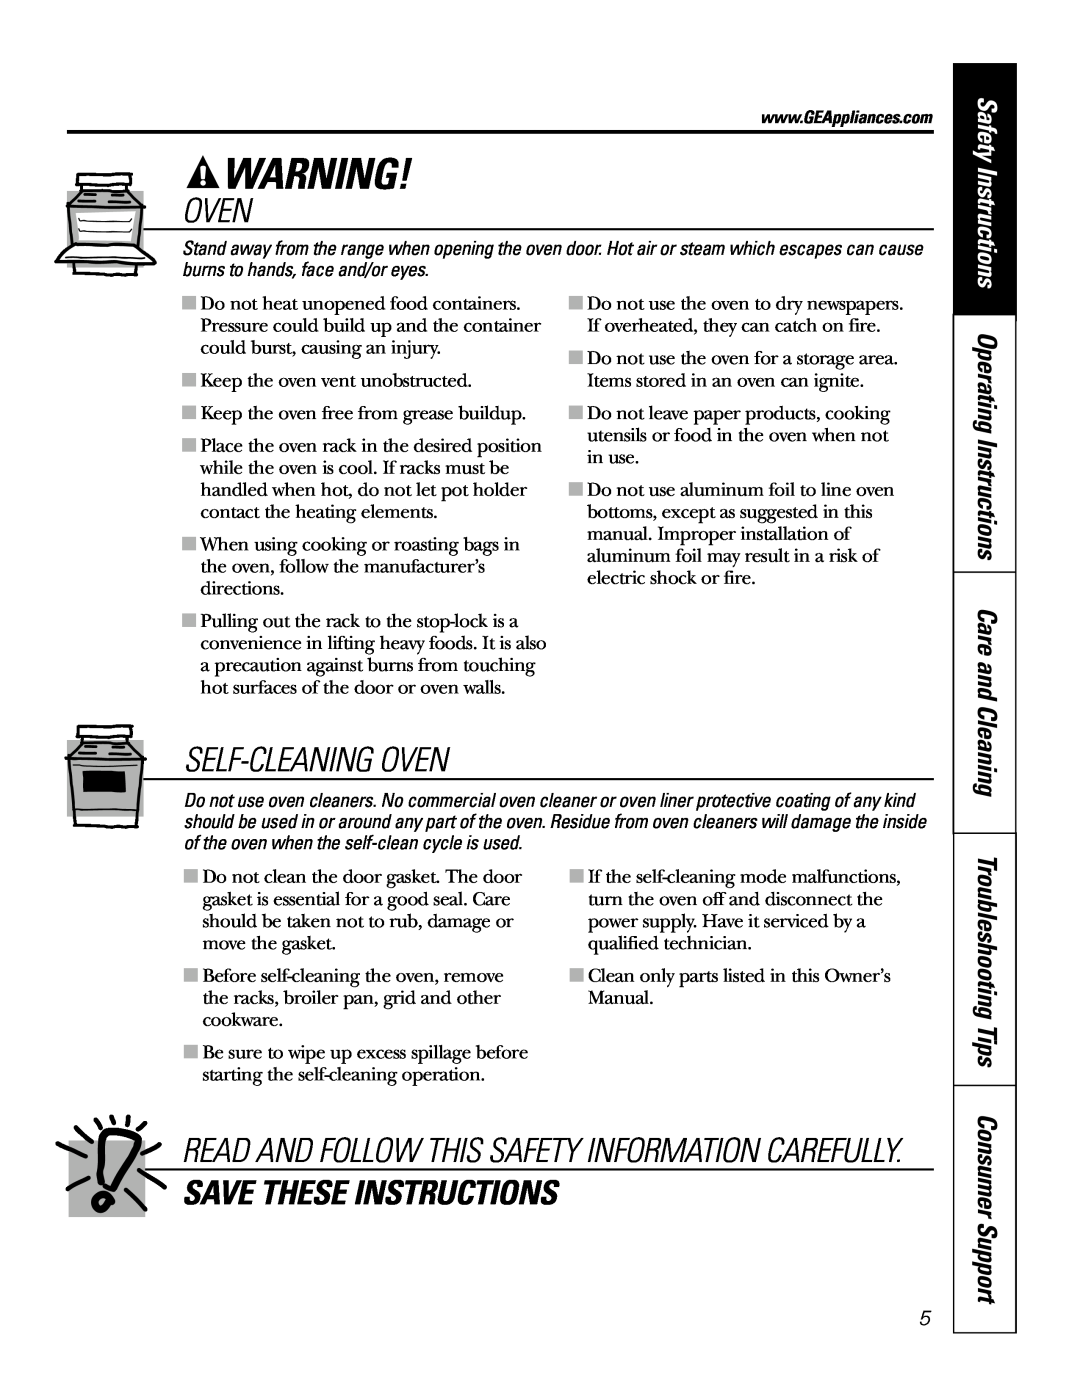 GE JSP42, JSP47 Self-Cleaning Oven, Save These Instructions, Operating Instructions Care and, Troubleshooting Tips 